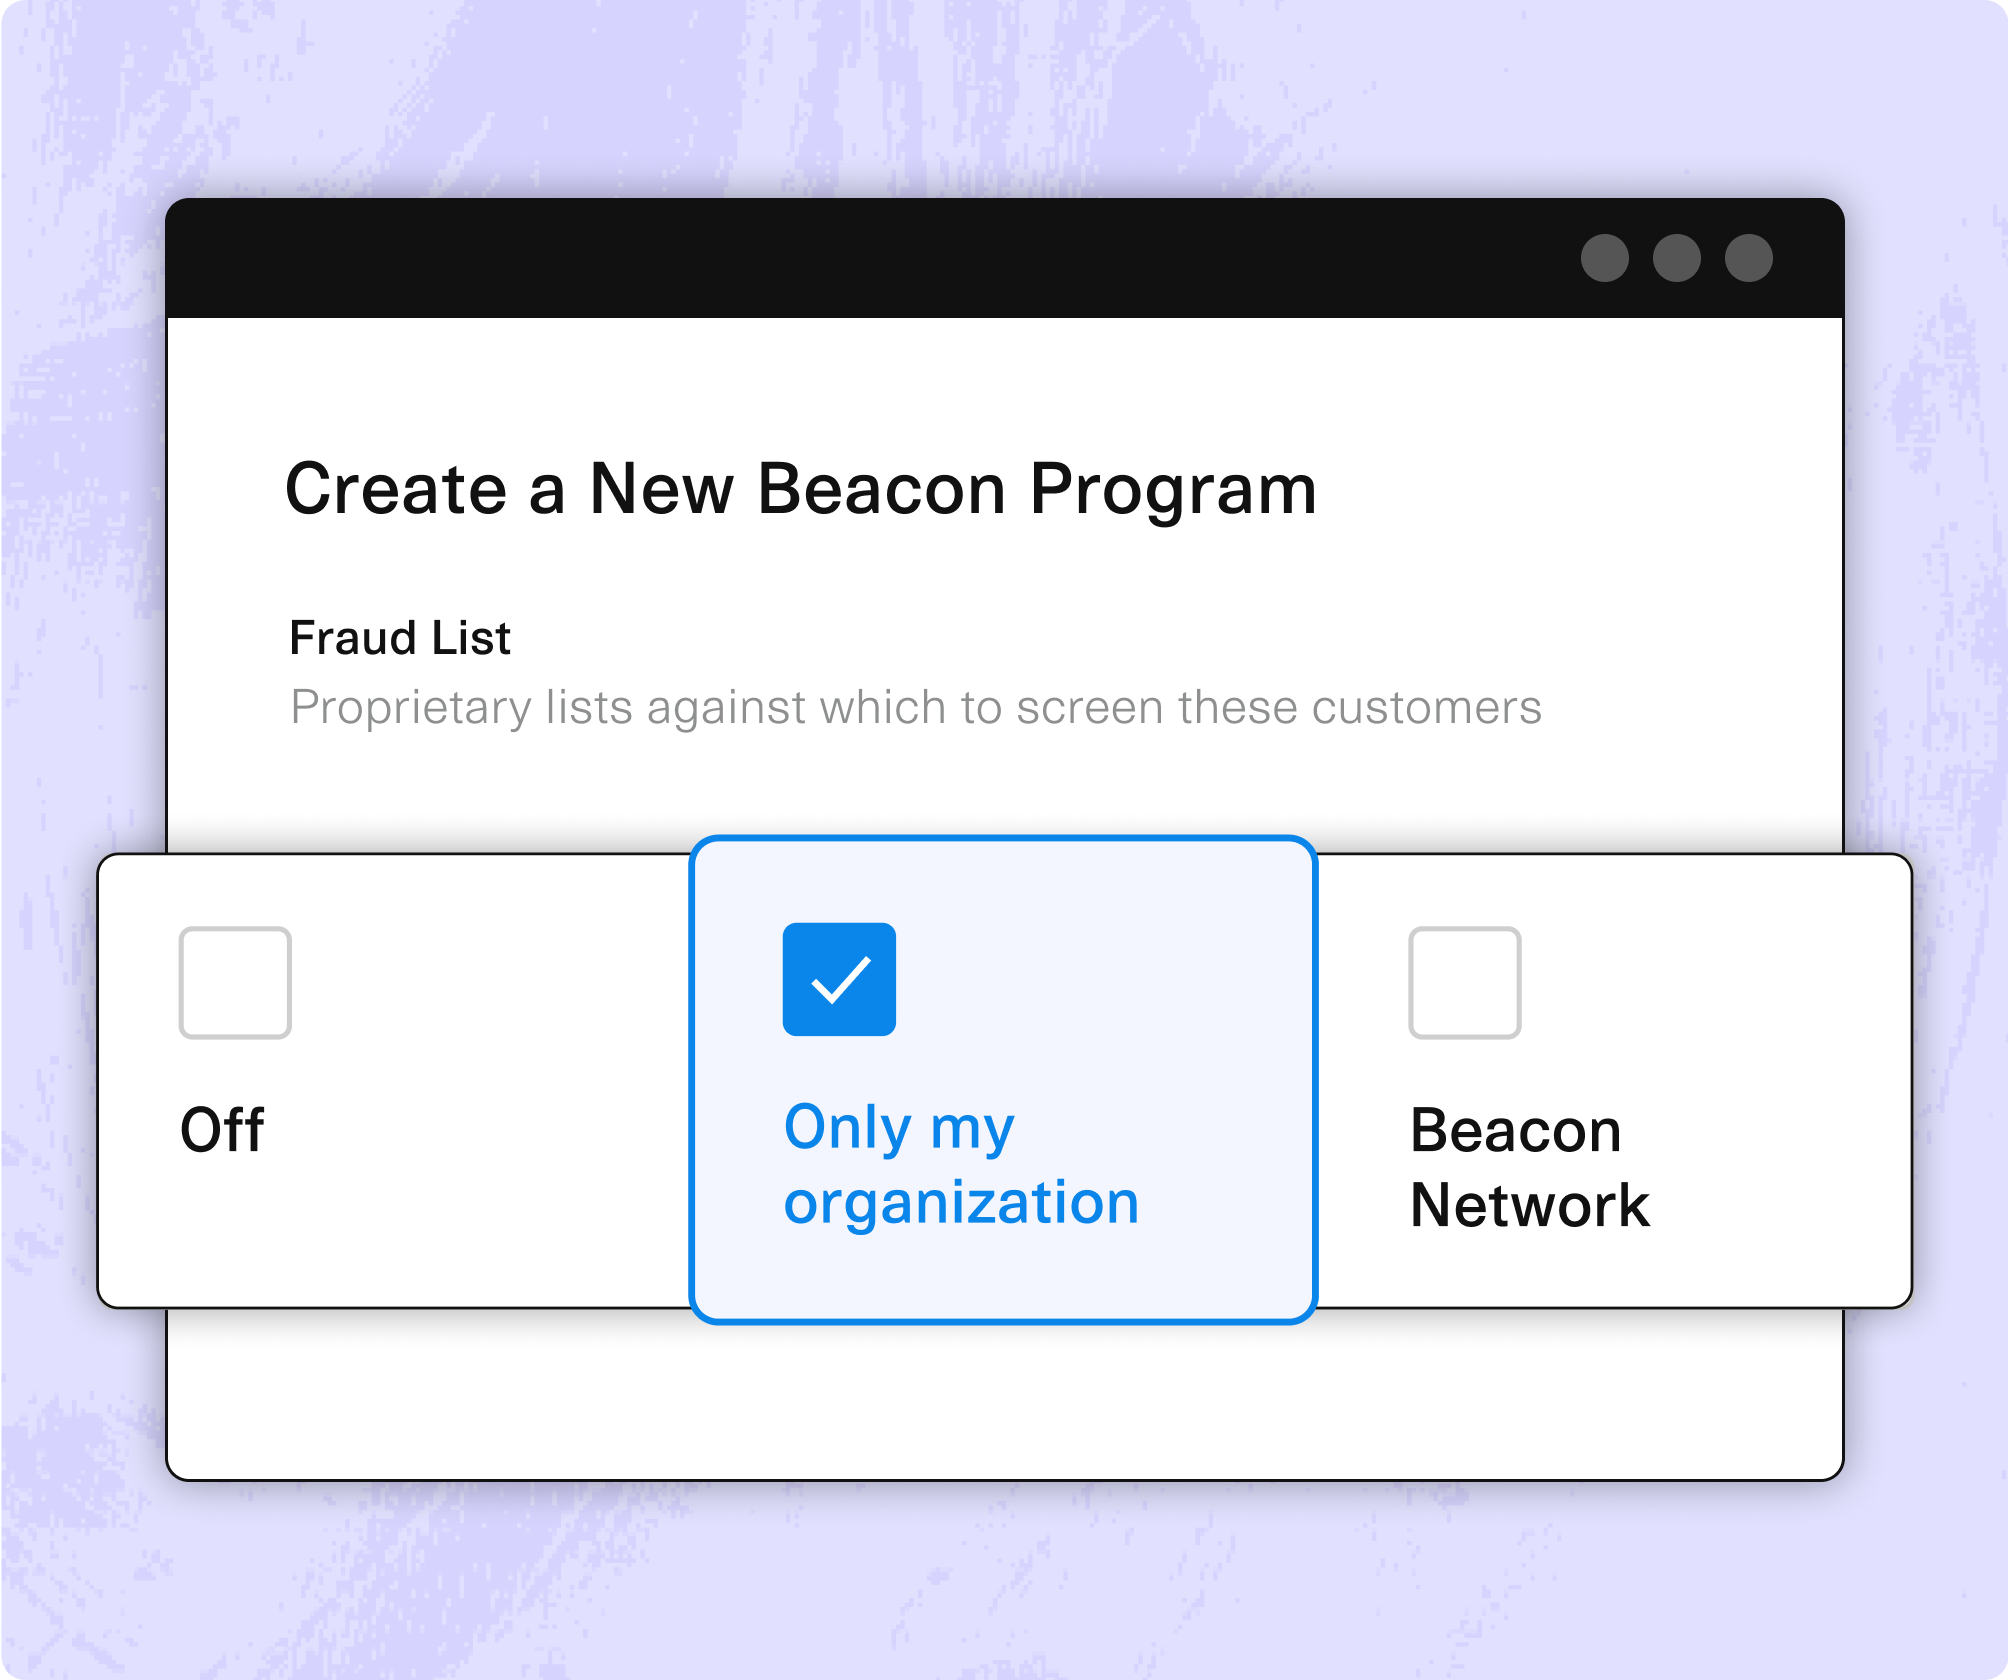 create new beacon program menu with checkmark on only my organization